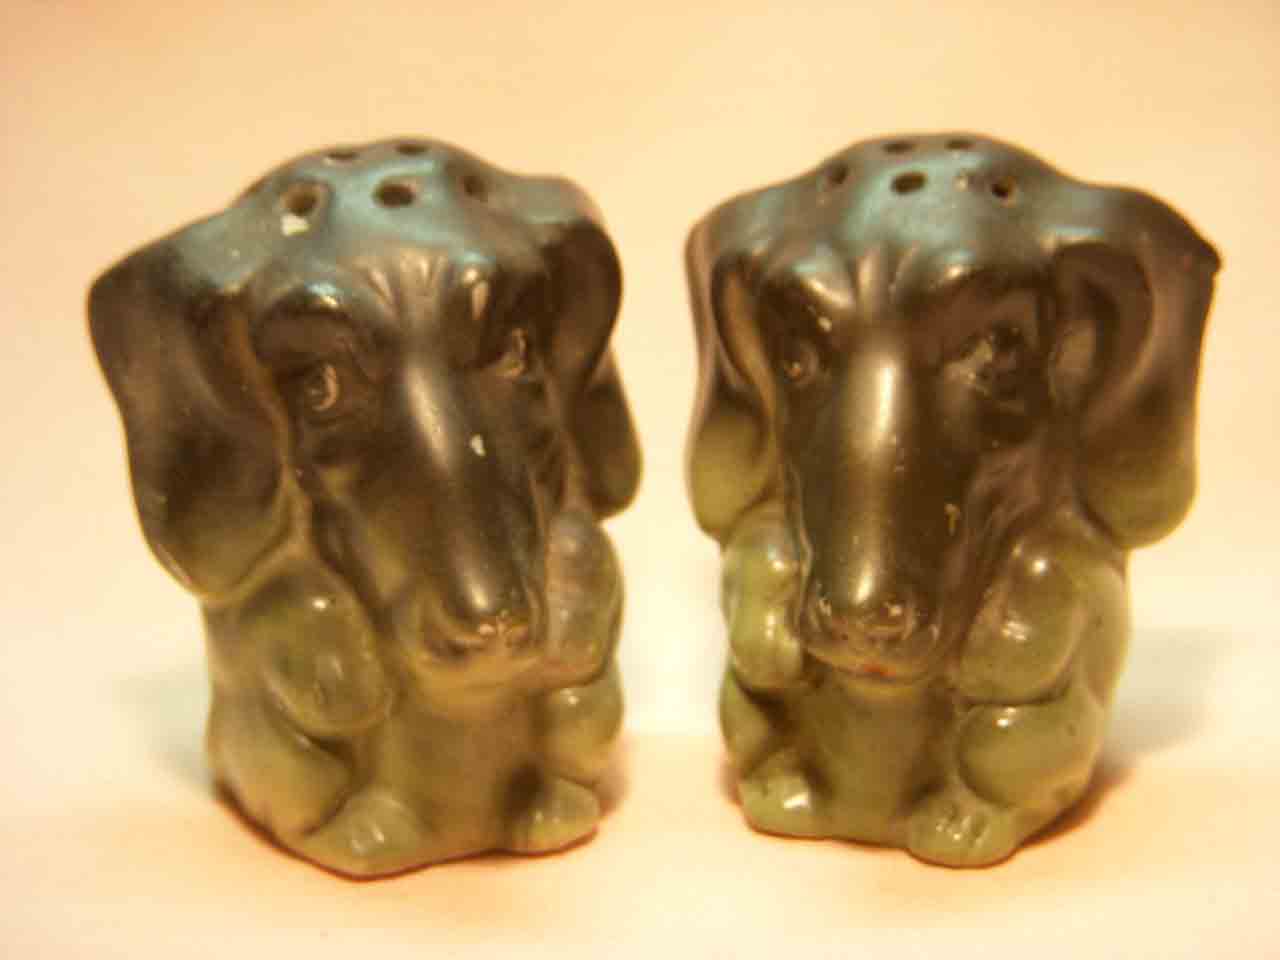 Conta & Boehme Germany dogs salt and pepper shakers